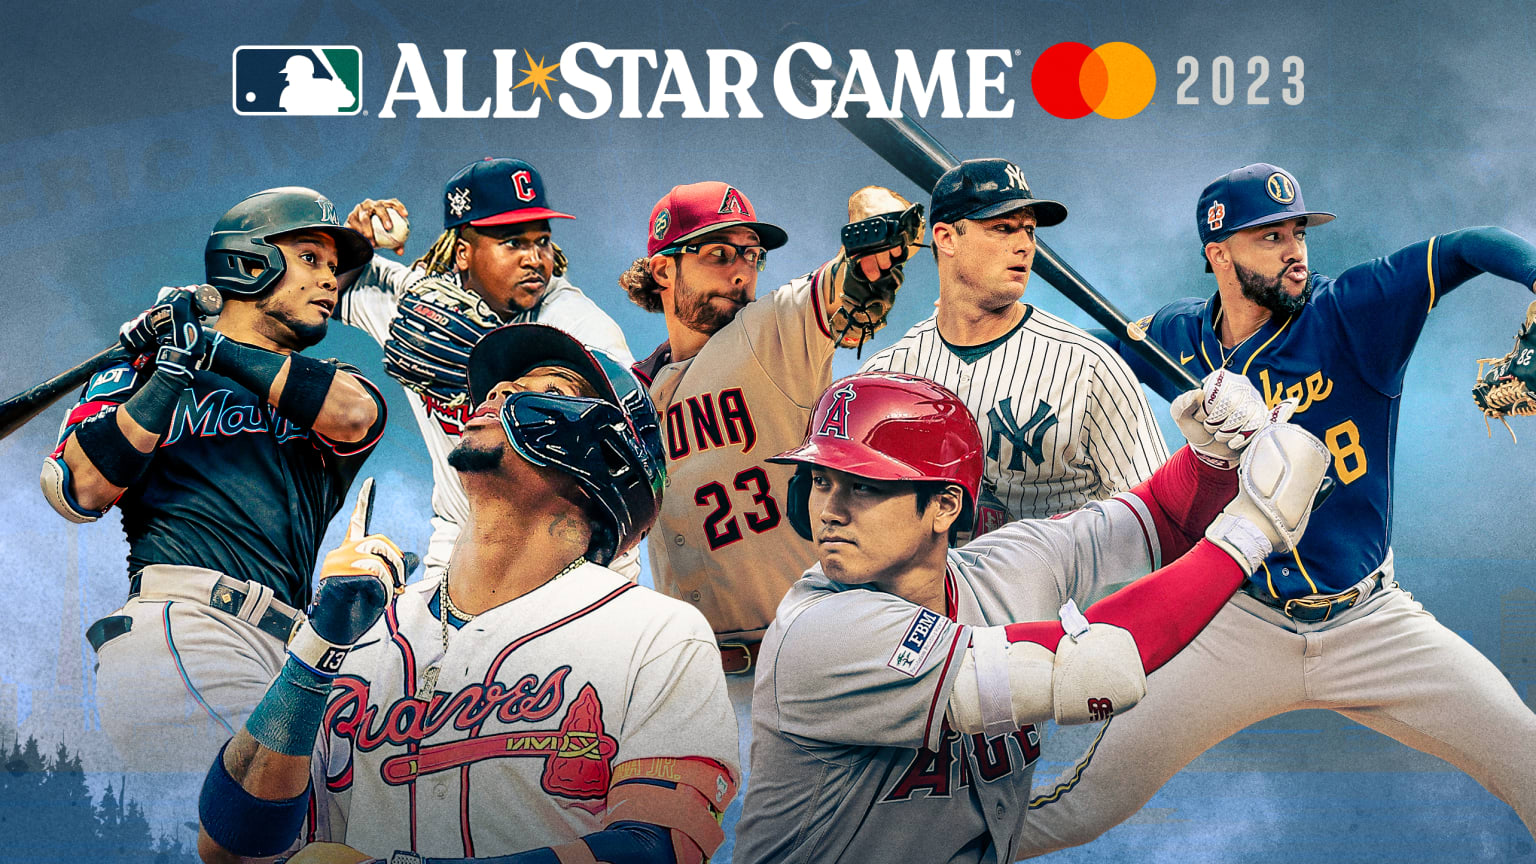 Seven All-Stars are pictured with the All-Star Game logo